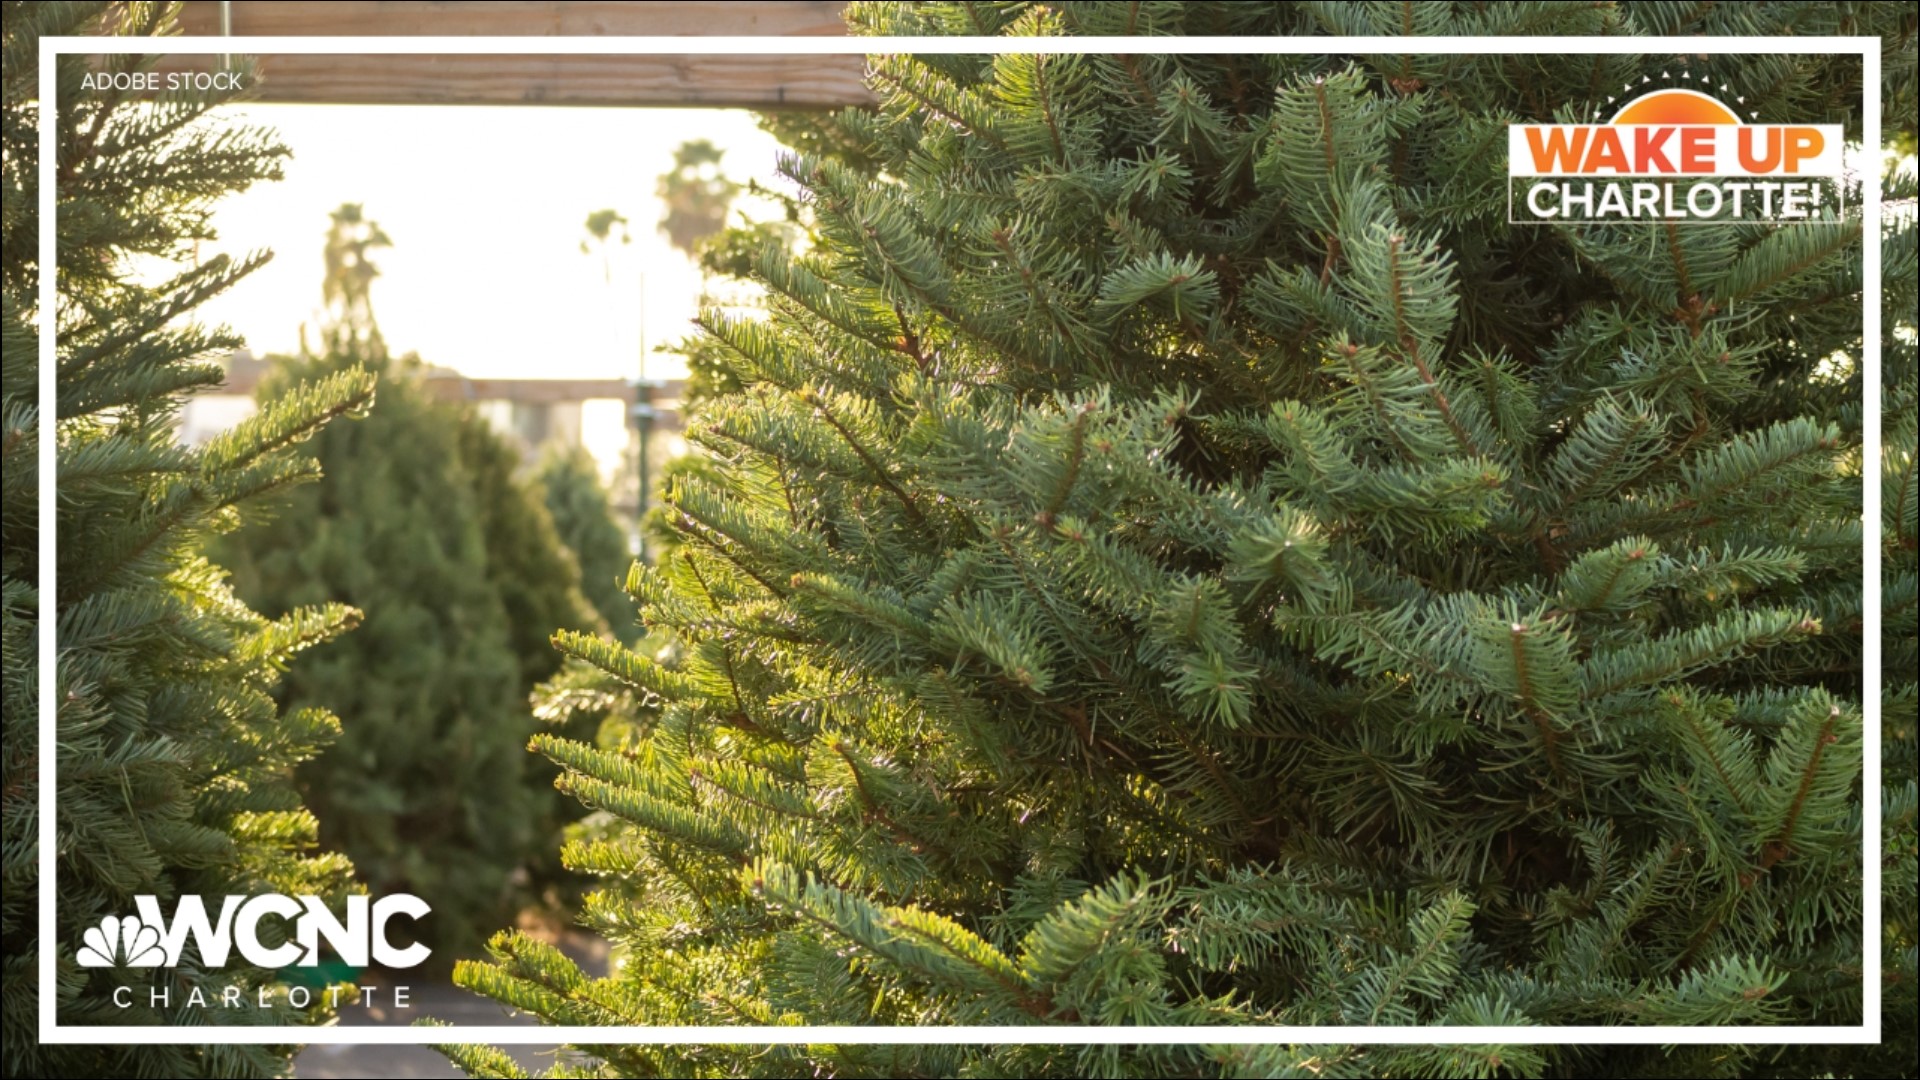 The size and shape of real Christmas trees can often be unpredictable -- plus the trees shed all those needles.